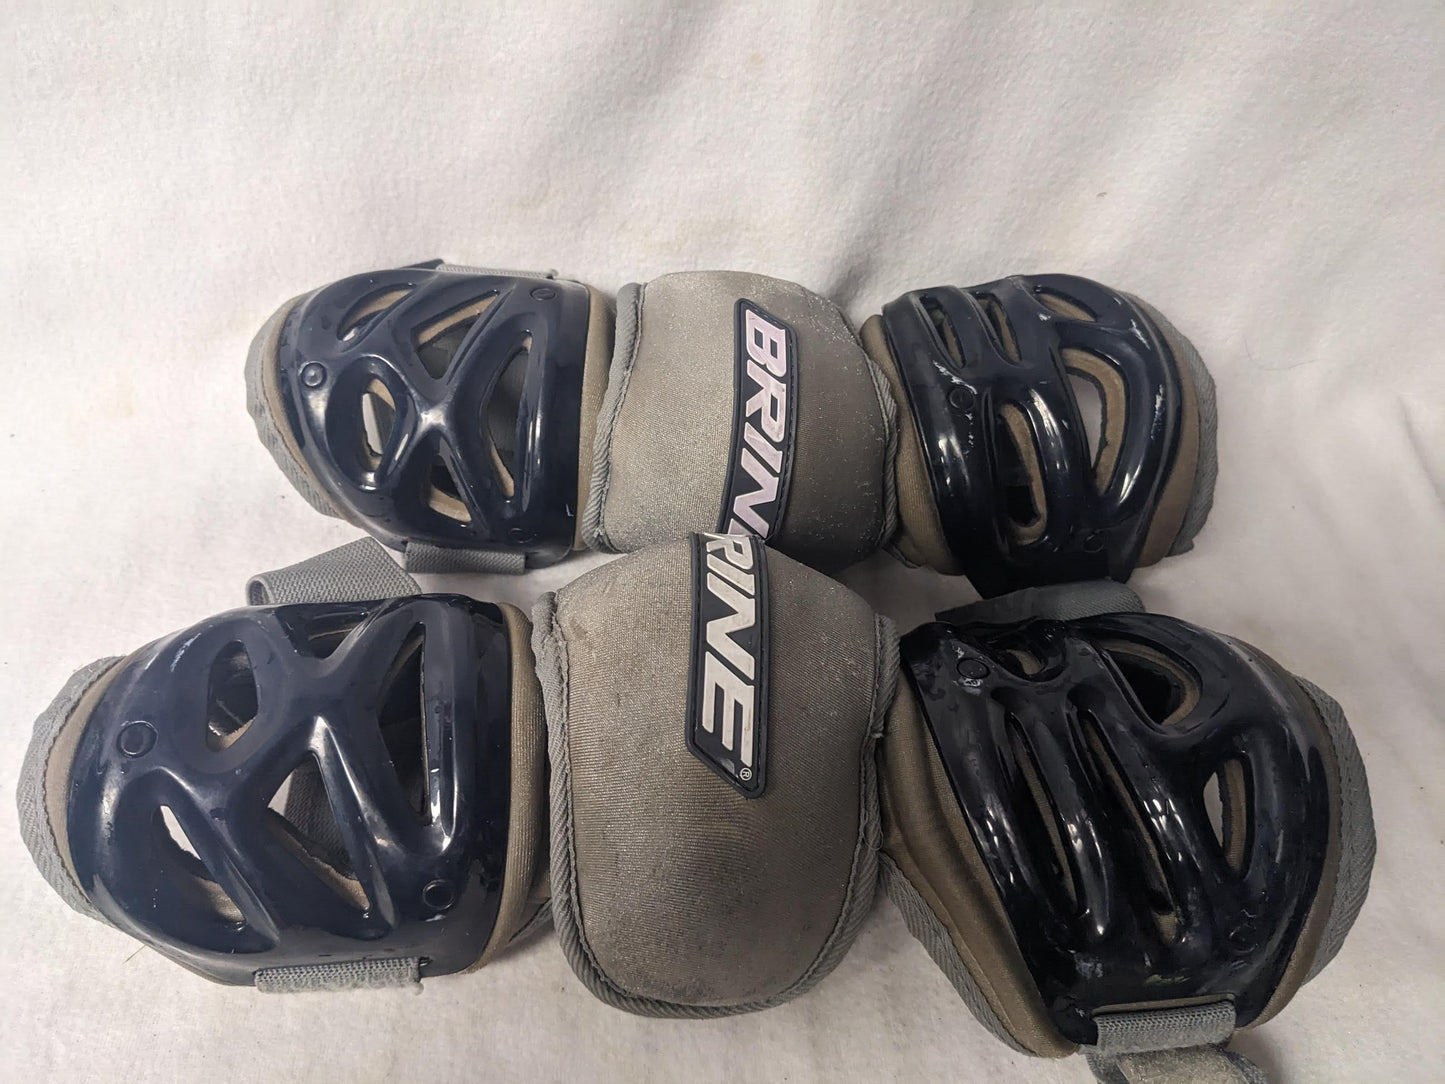 Brine Lacrosse LAX Elbow Pads Size Youth Small Color Gray Condition Used